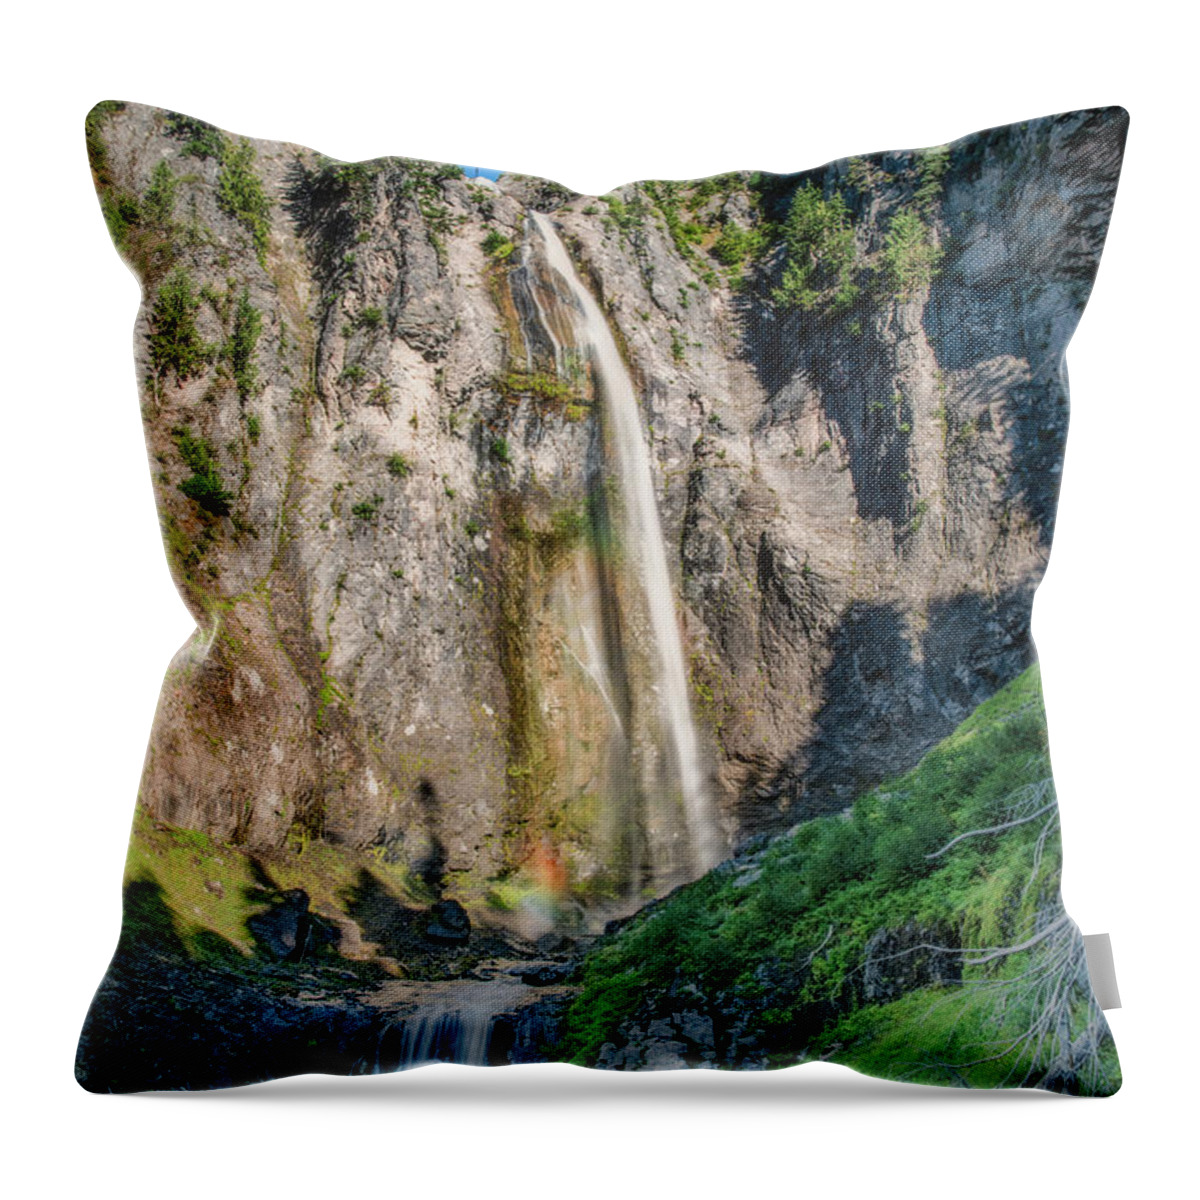 Mount Rainier Throw Pillow featuring the photograph Comet Falls by Robert J Wagner